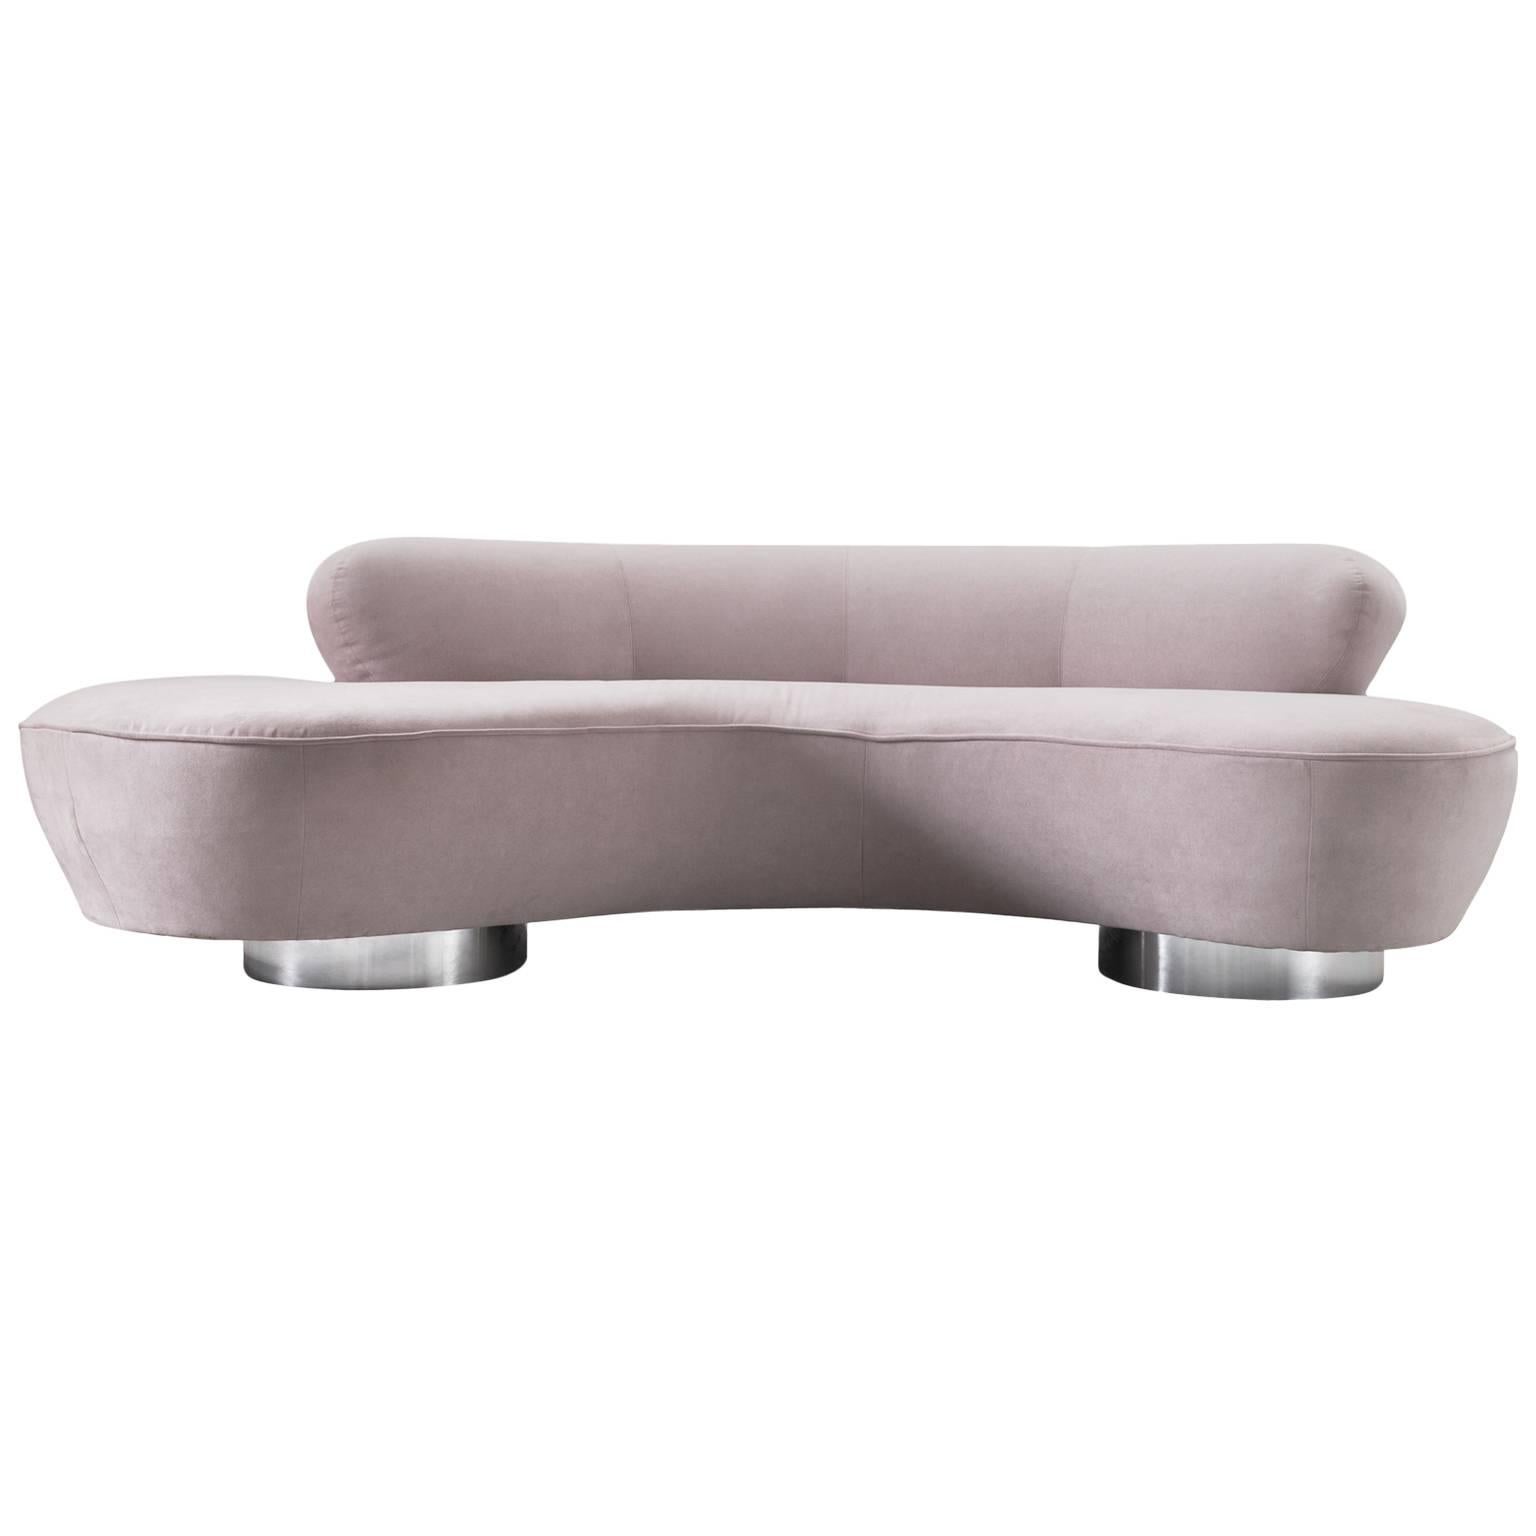 Sofa, pink upholstery, metal base, design 1956, execution, 1970s.

This 'shorty' serpentine sofa by Vladimir Kagan (1927-2016) has a sculptural beauty thanks to its absolute clarity of forms. It features two round pedestals, chrome plated covers